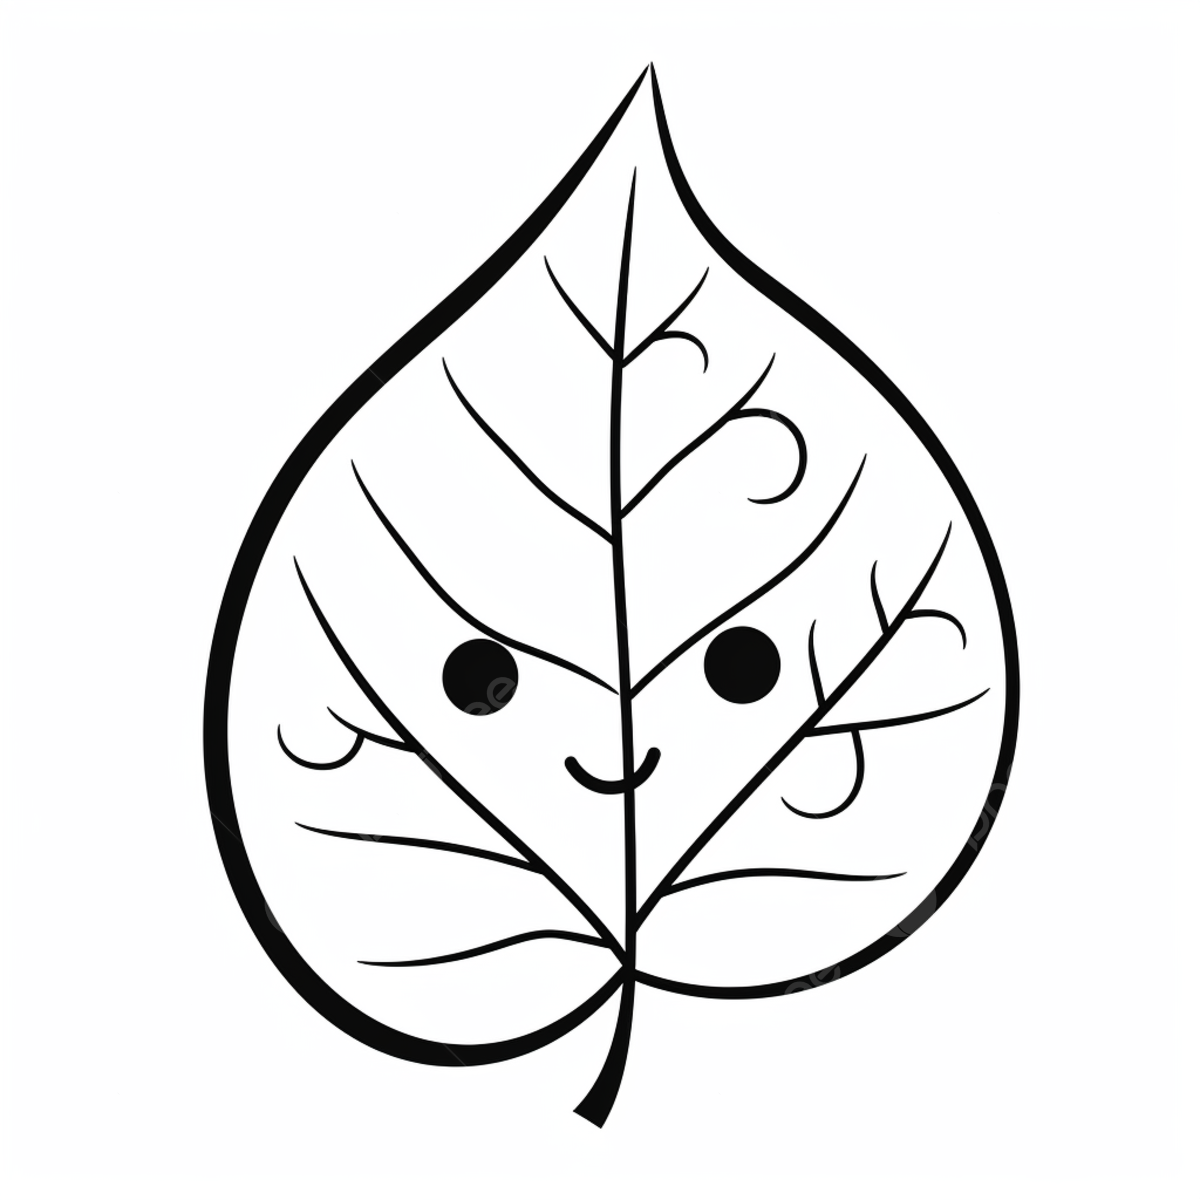 Leaf coloring template features a smiling face leaf drawing face drawing ring drawing png transparent image and clipart for free download